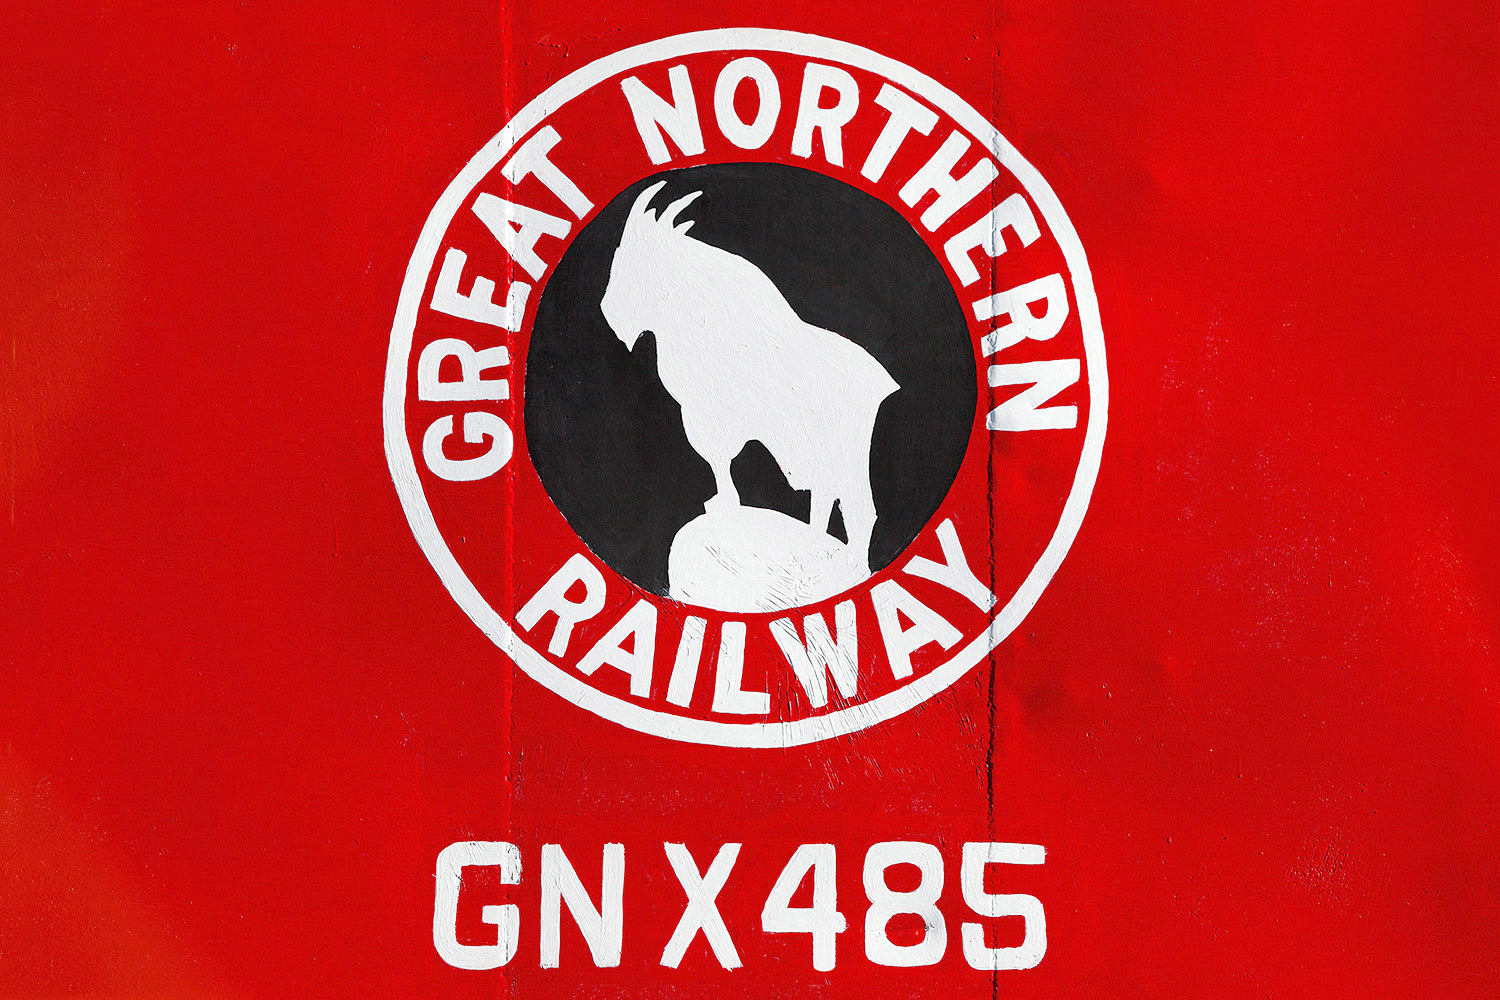 A close-up of the Great Northern Railway logo on the side of a caboose in Havre, Montana which is painted in bright, bright red.&nbsp;→ Buy a Print&nbsp;or&nbsp;License Photo